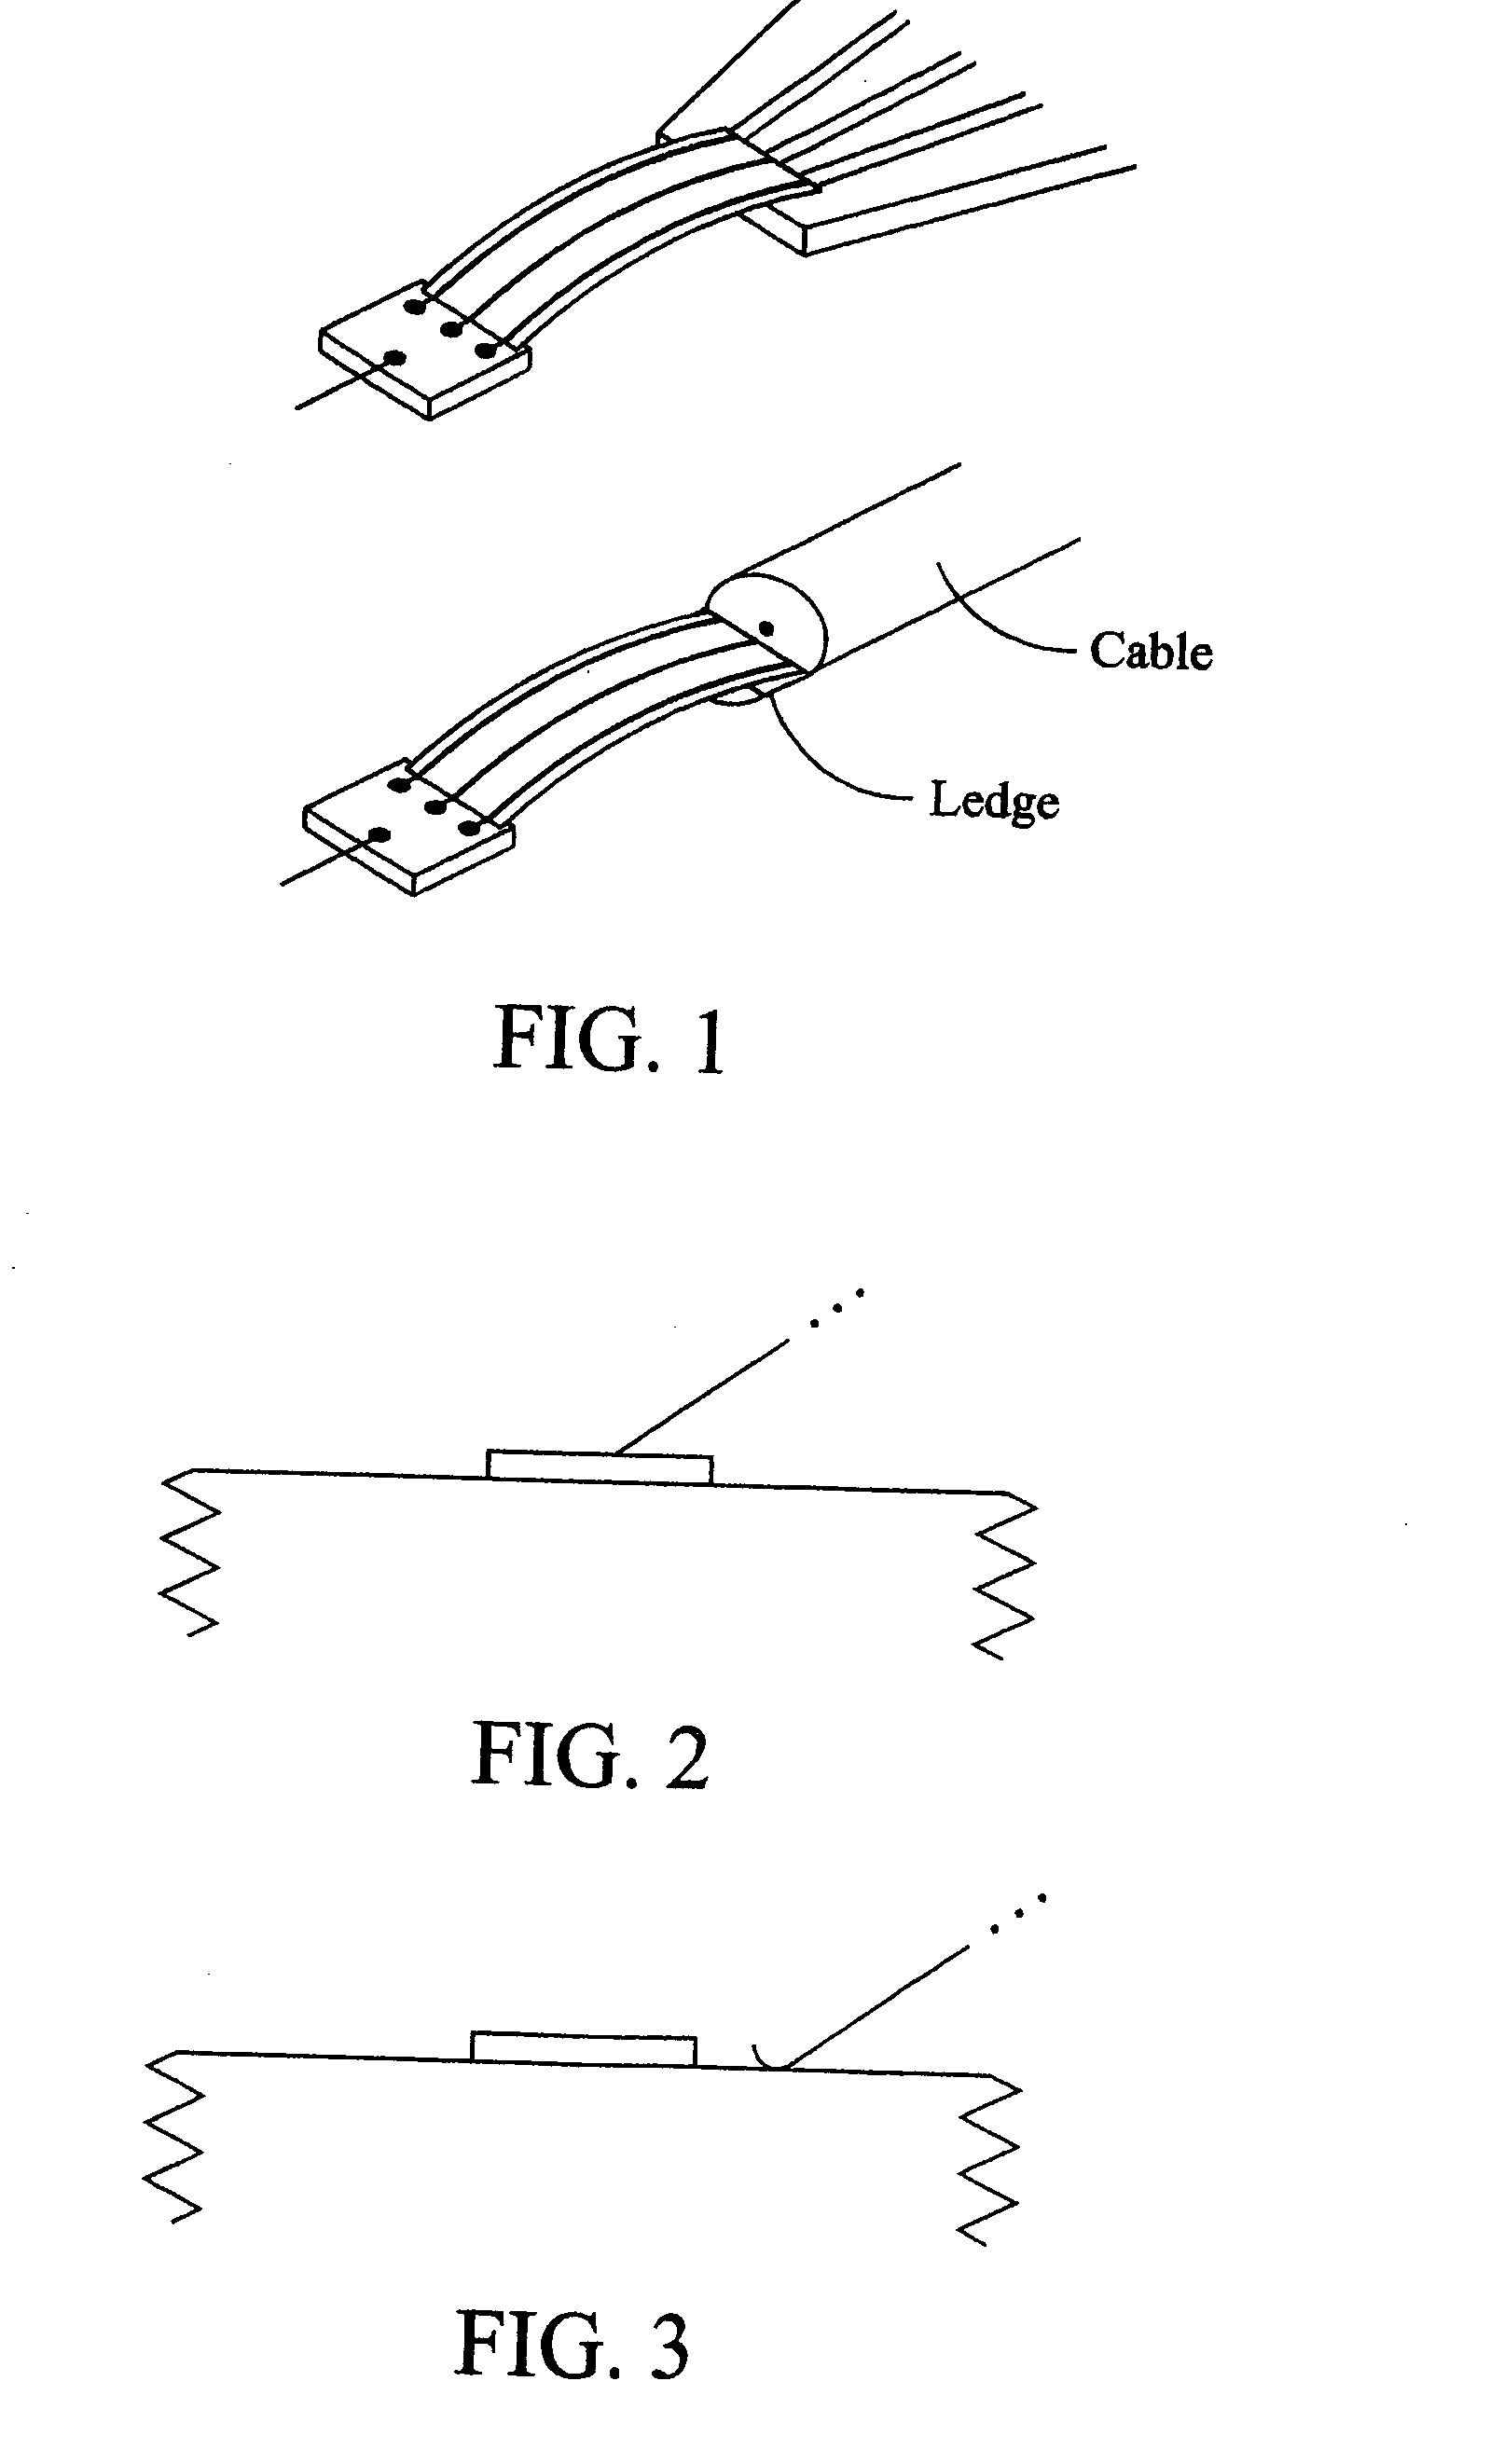 Active wafer probe